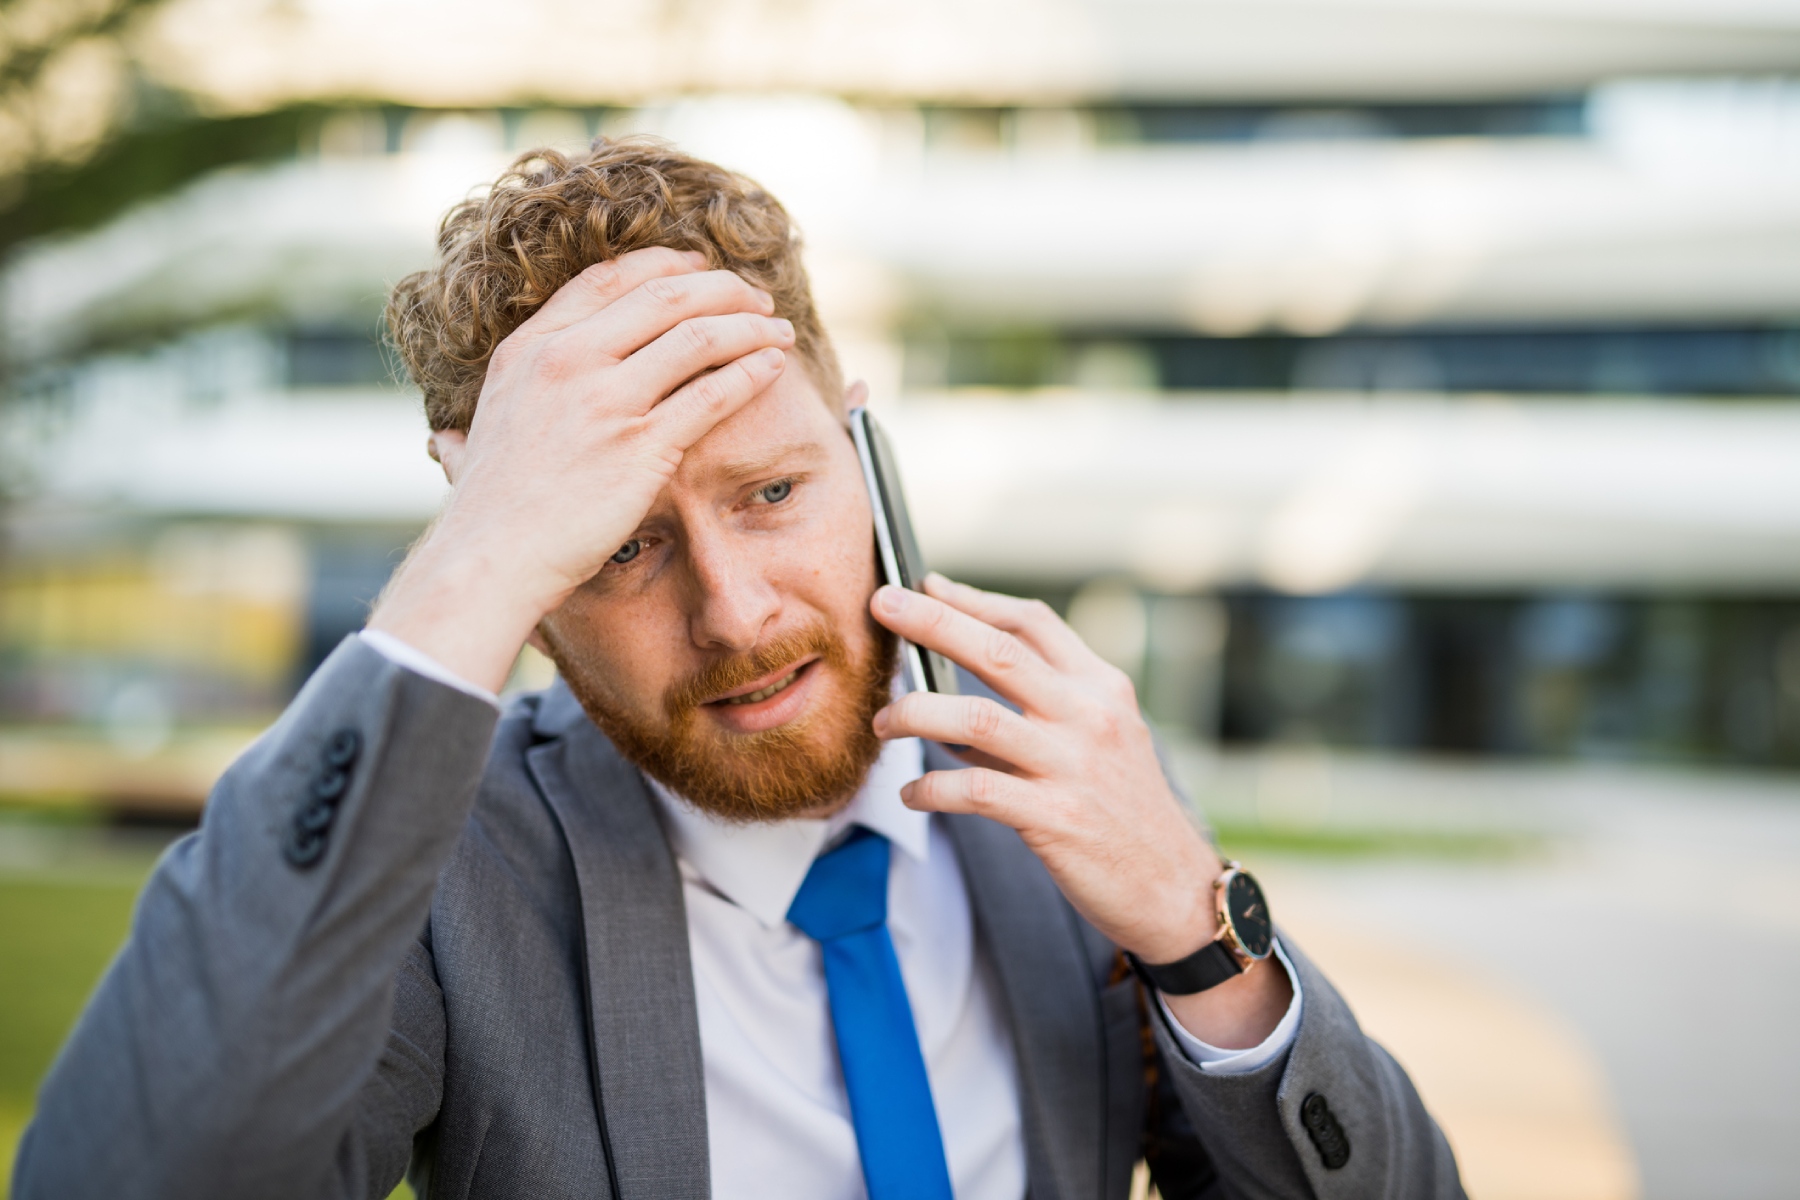 thailand emergency number: a red-headed business man in a suit speaking on his mobile phone and holding his hand to his head while looking anxious

